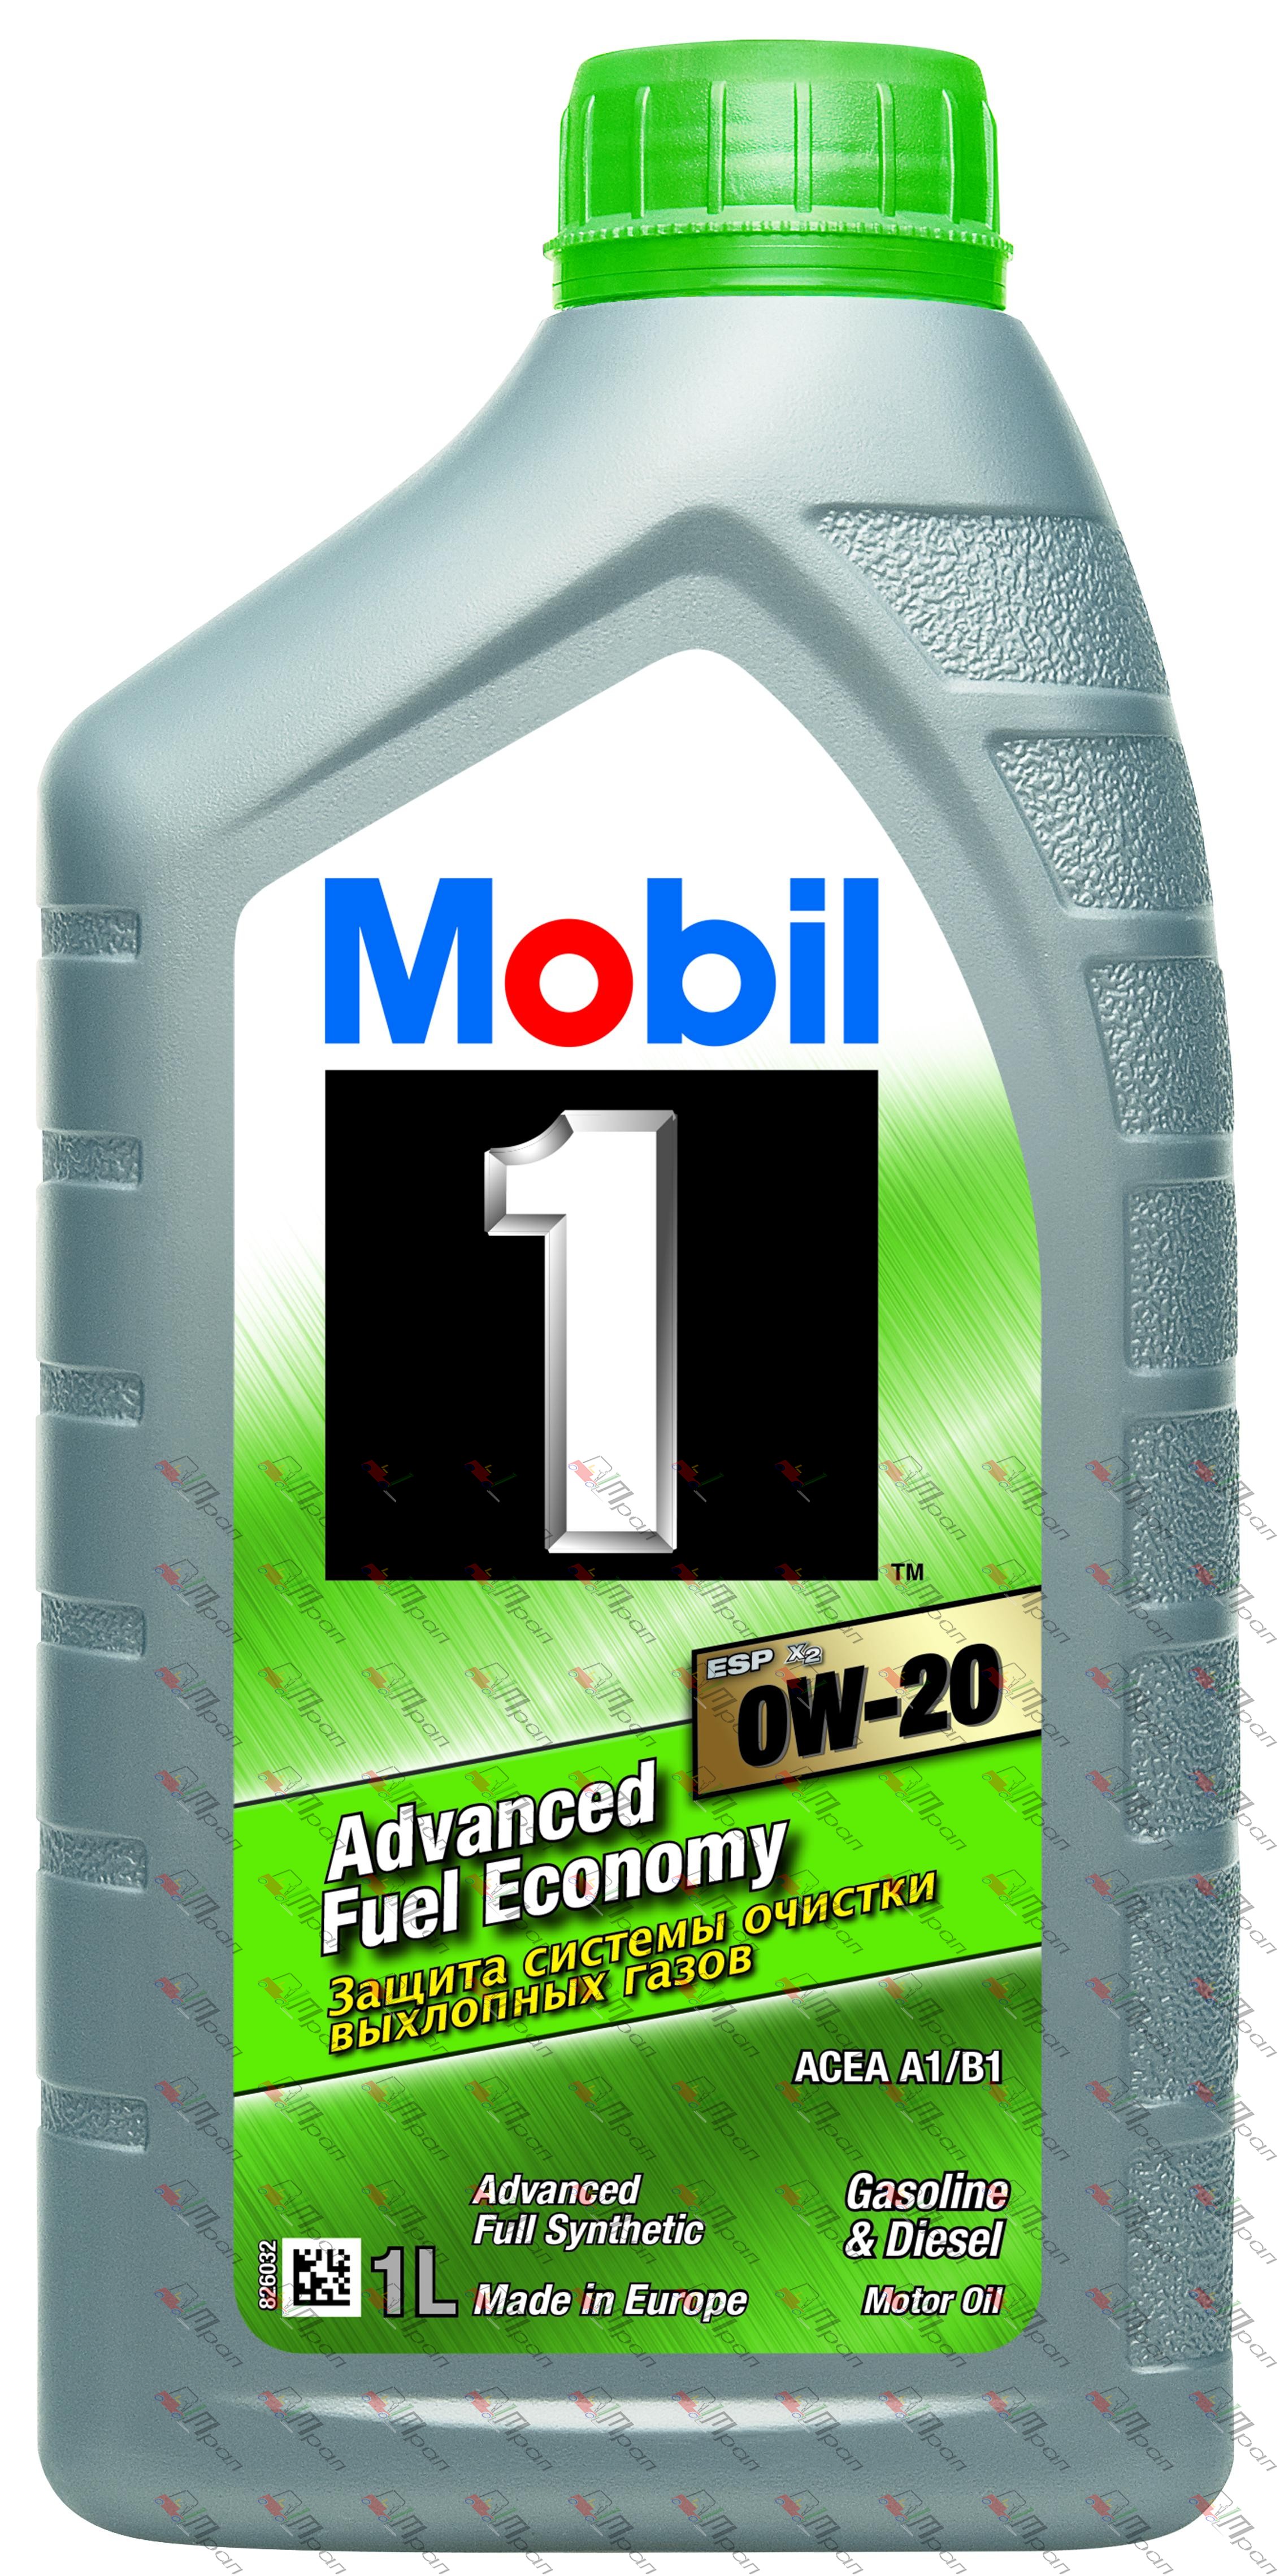 Mobil Масло моторное синтетич. Mobil 1 ESP X2 0w20 1л